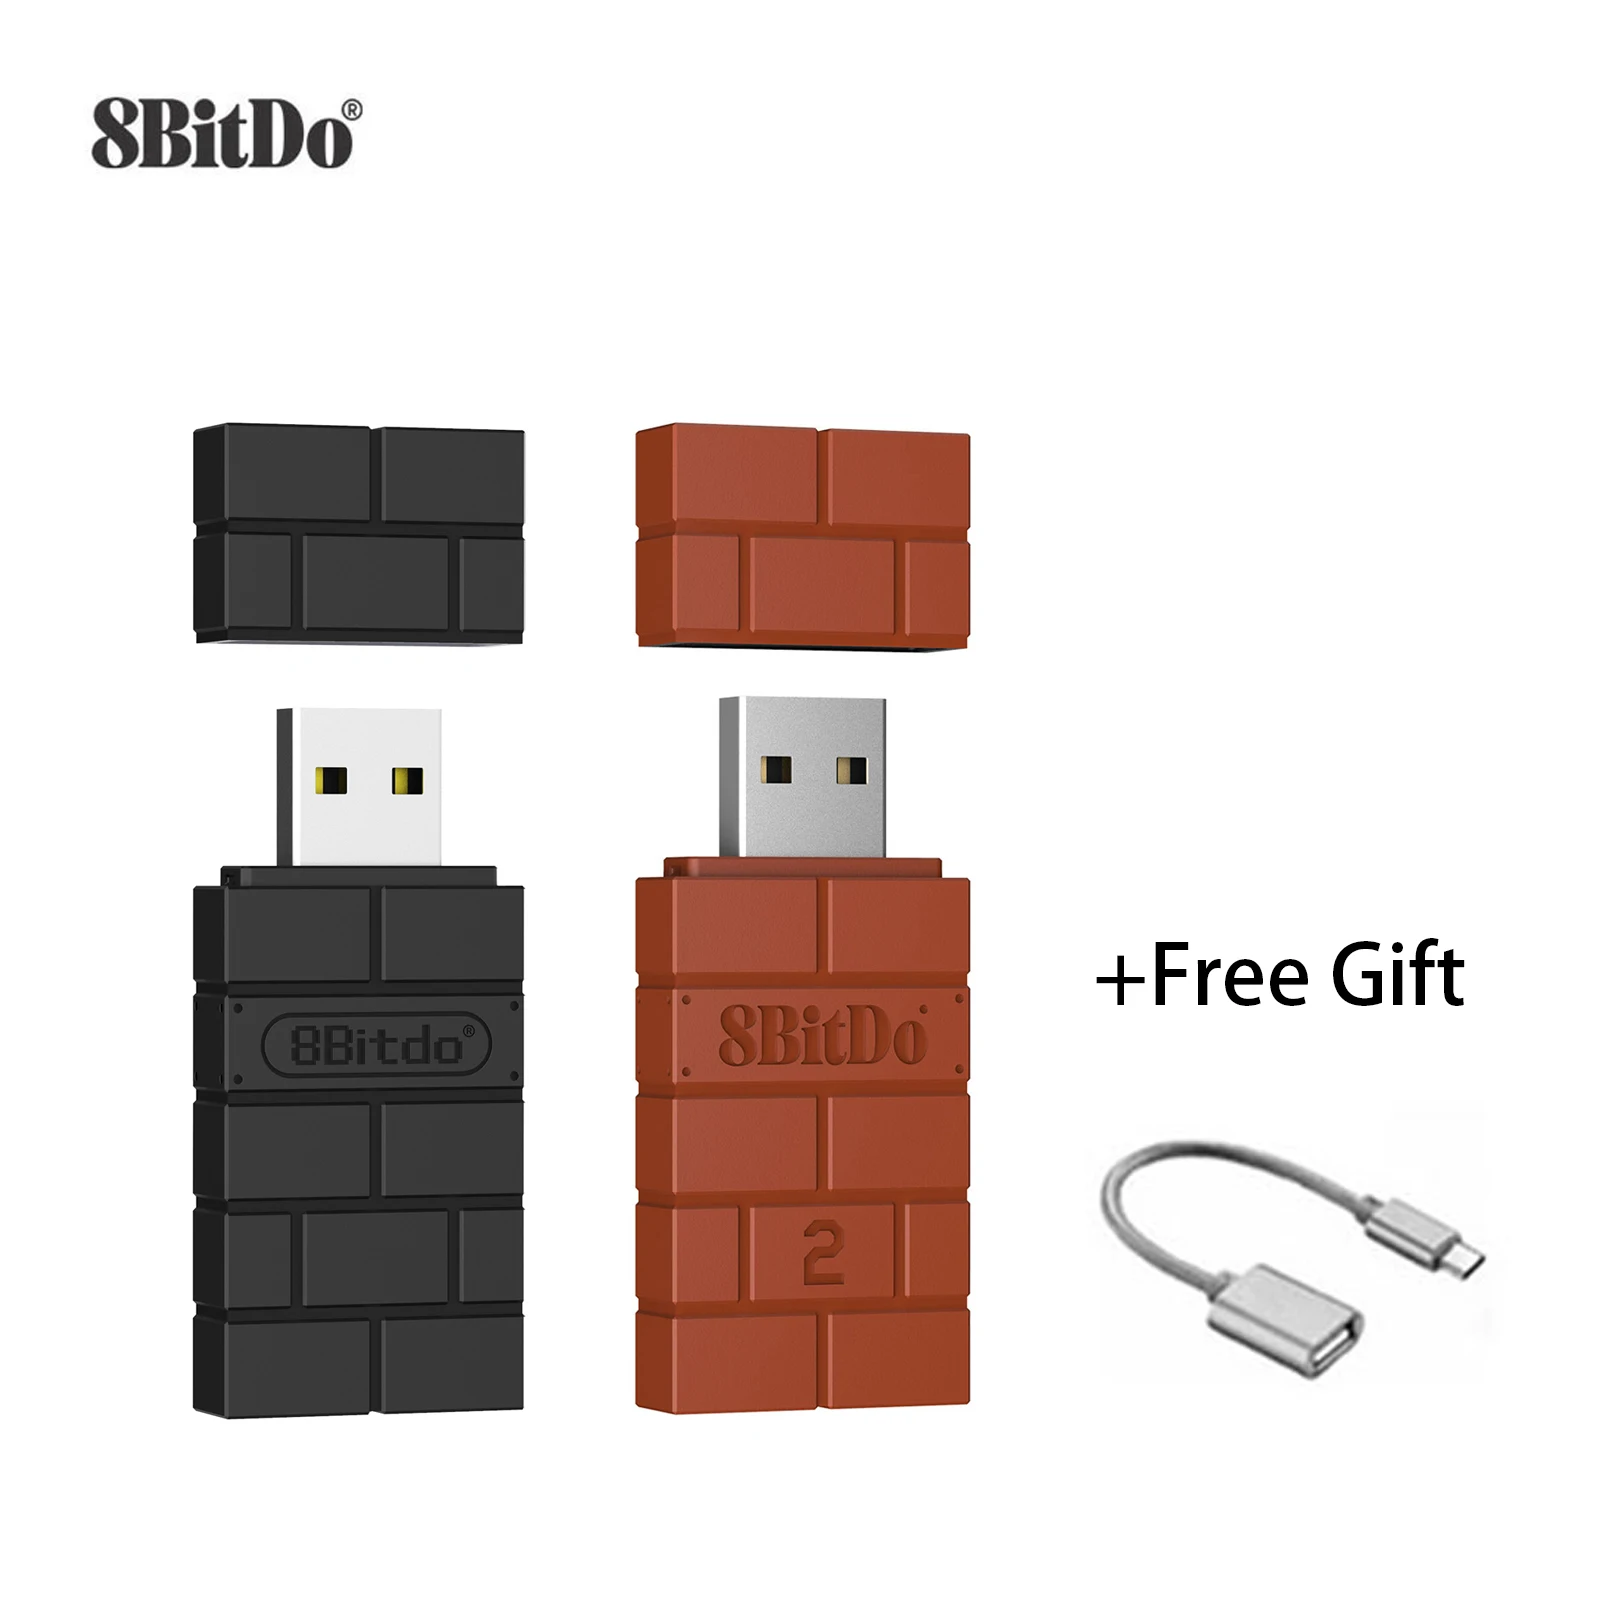 

8BitDo USB Receiver Wireless Bluetooth Adapter 2 for Windows Mac Raspberry Pi Nintendo Switch Support PS3 PS4 PS5 Xbox Gamepad